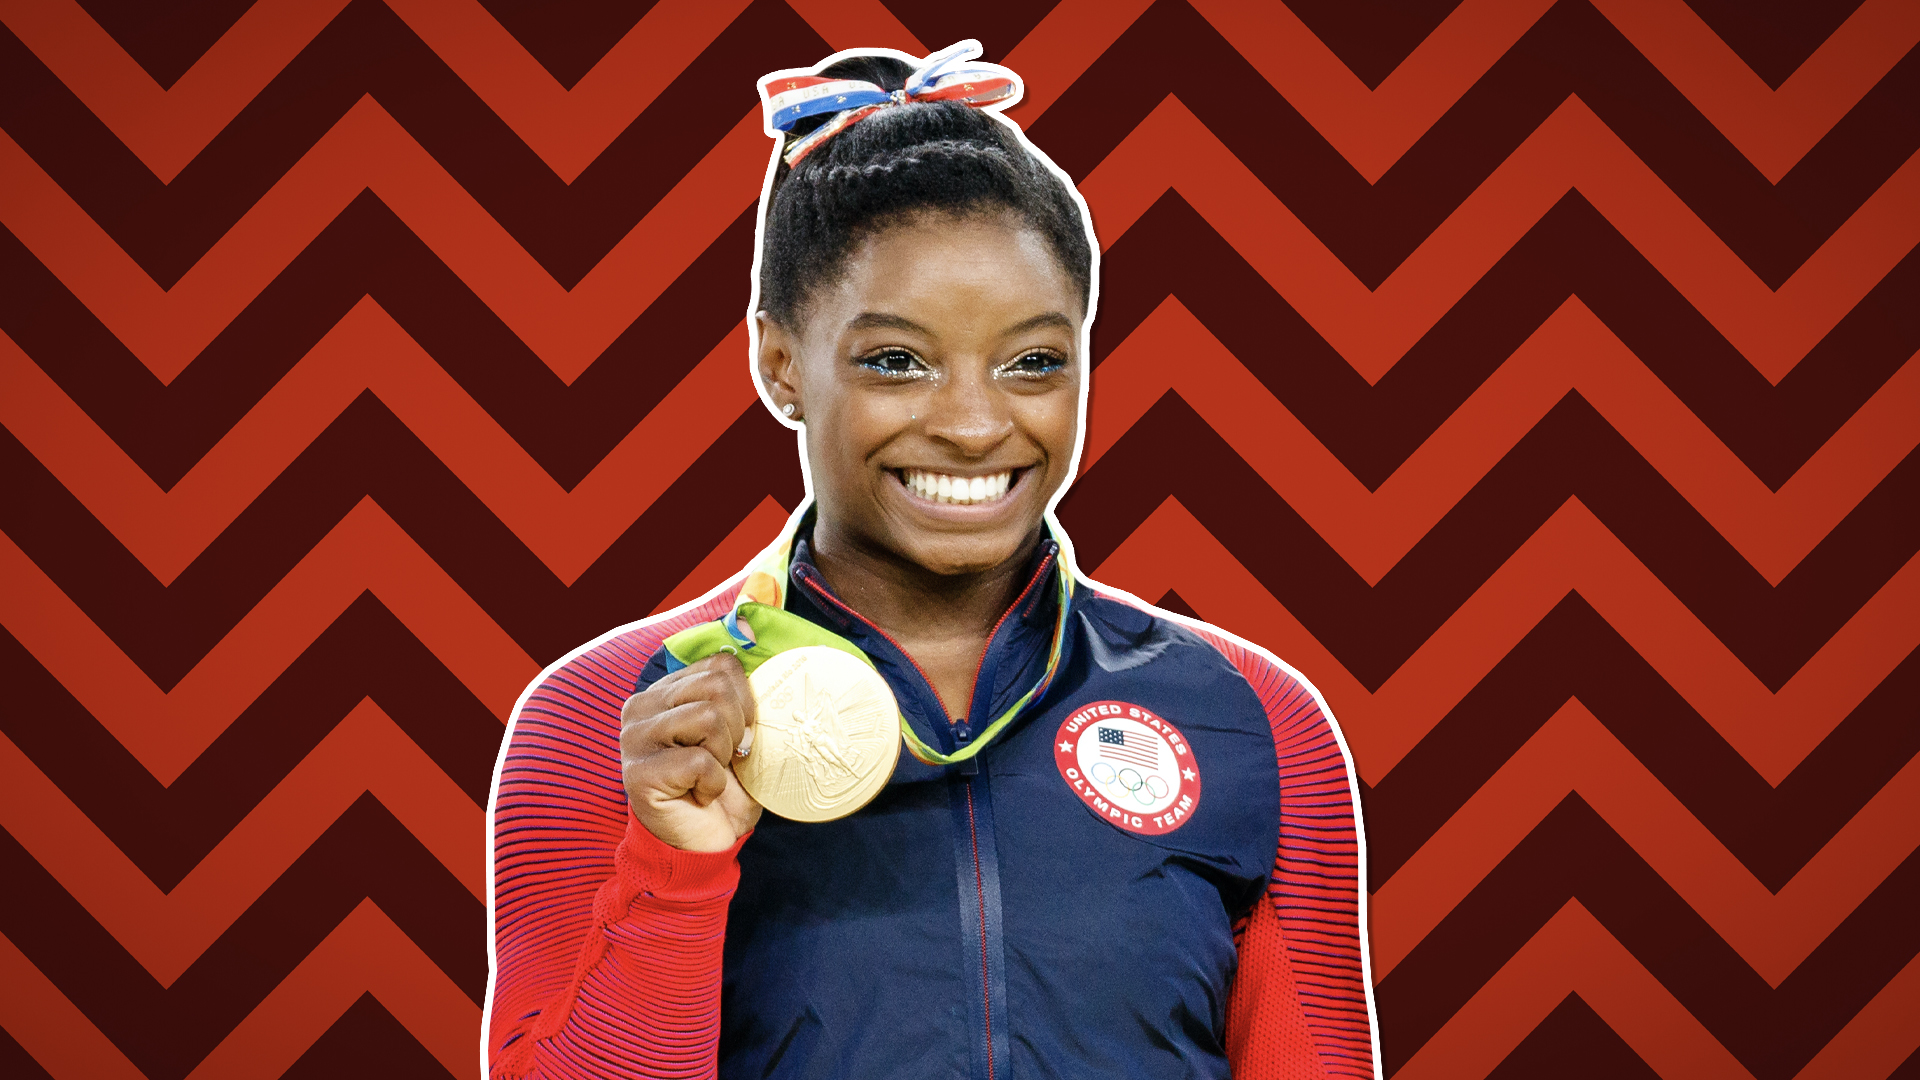 This US gymnast has won a LOT of gold medals